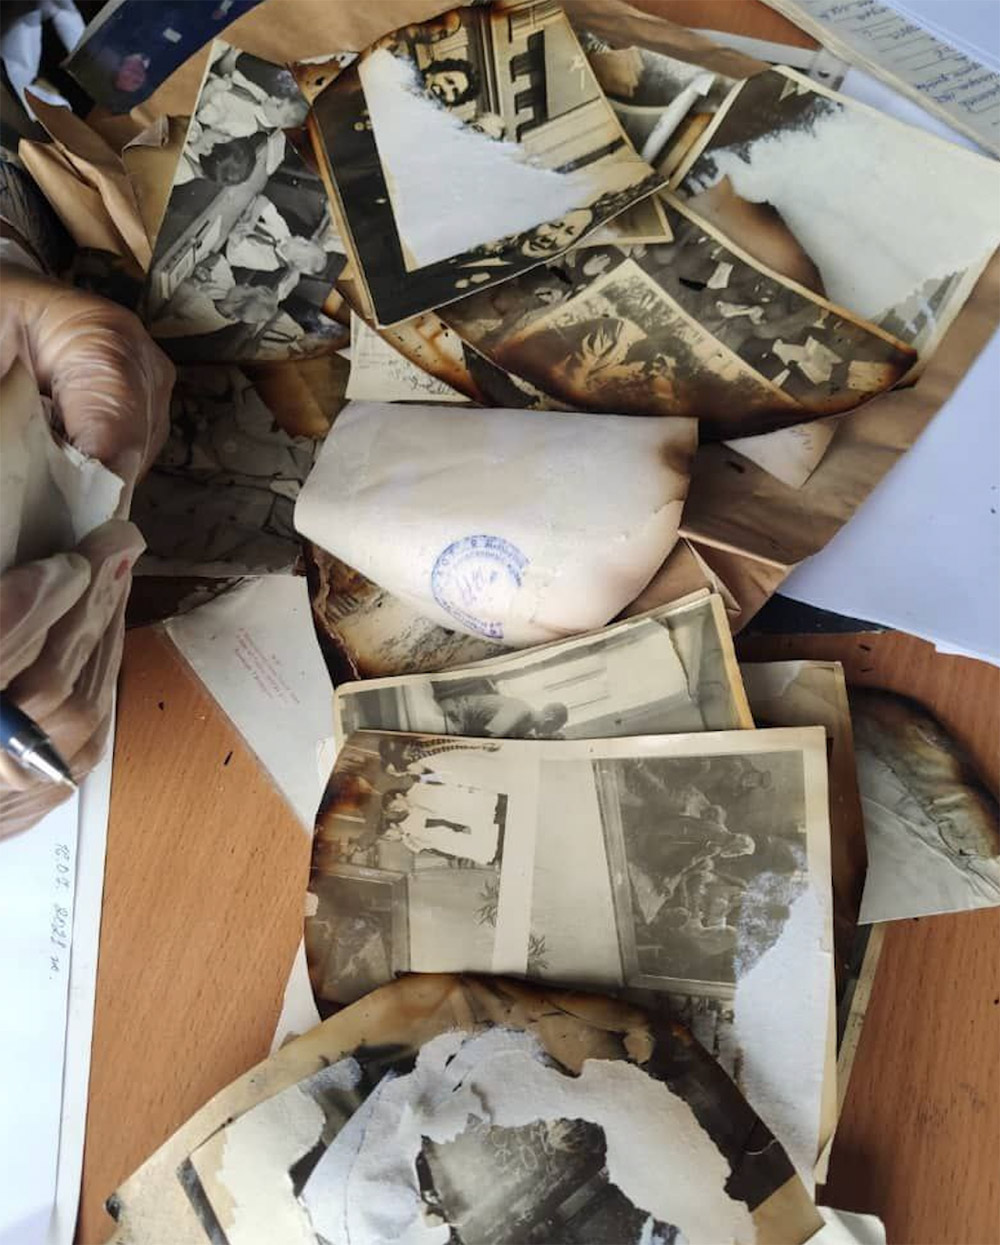 Partially burned historical photographs from the collection